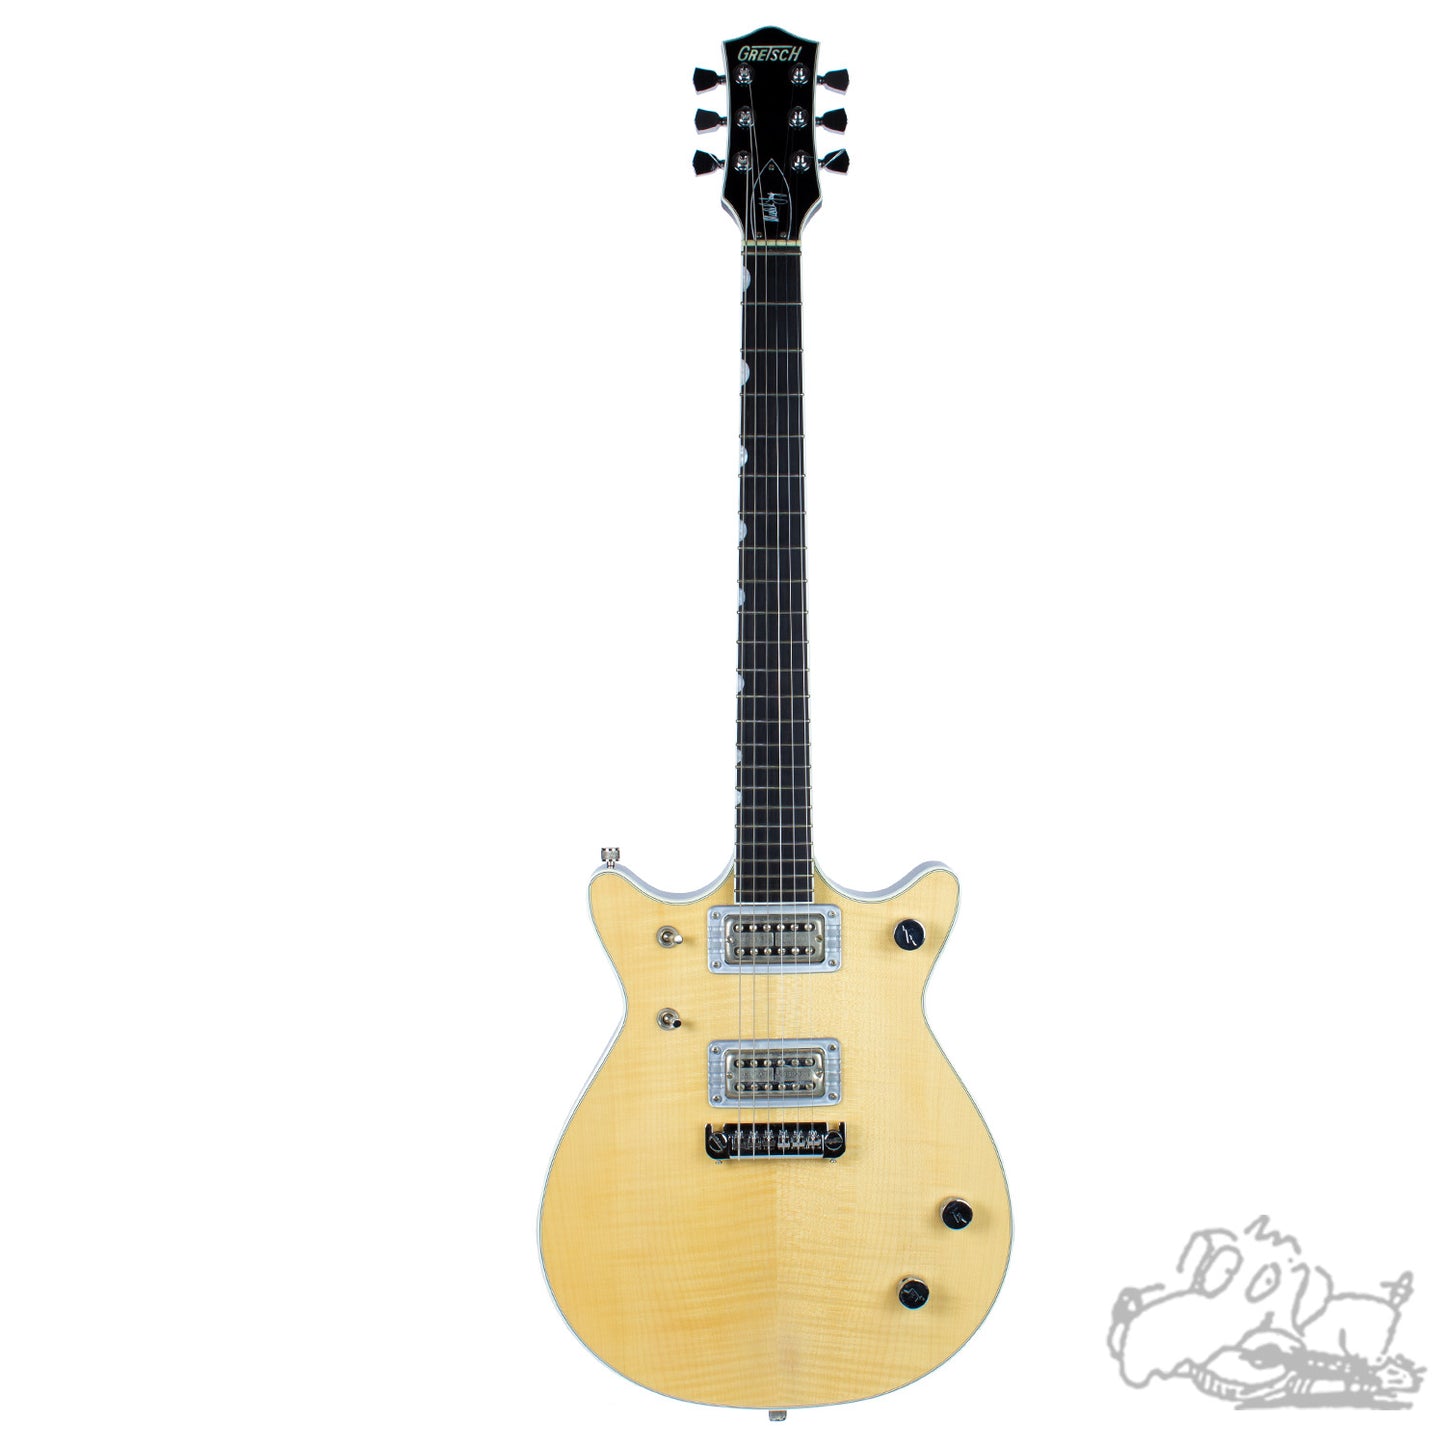 2005 Gretsch Malcolm Young Signature Model